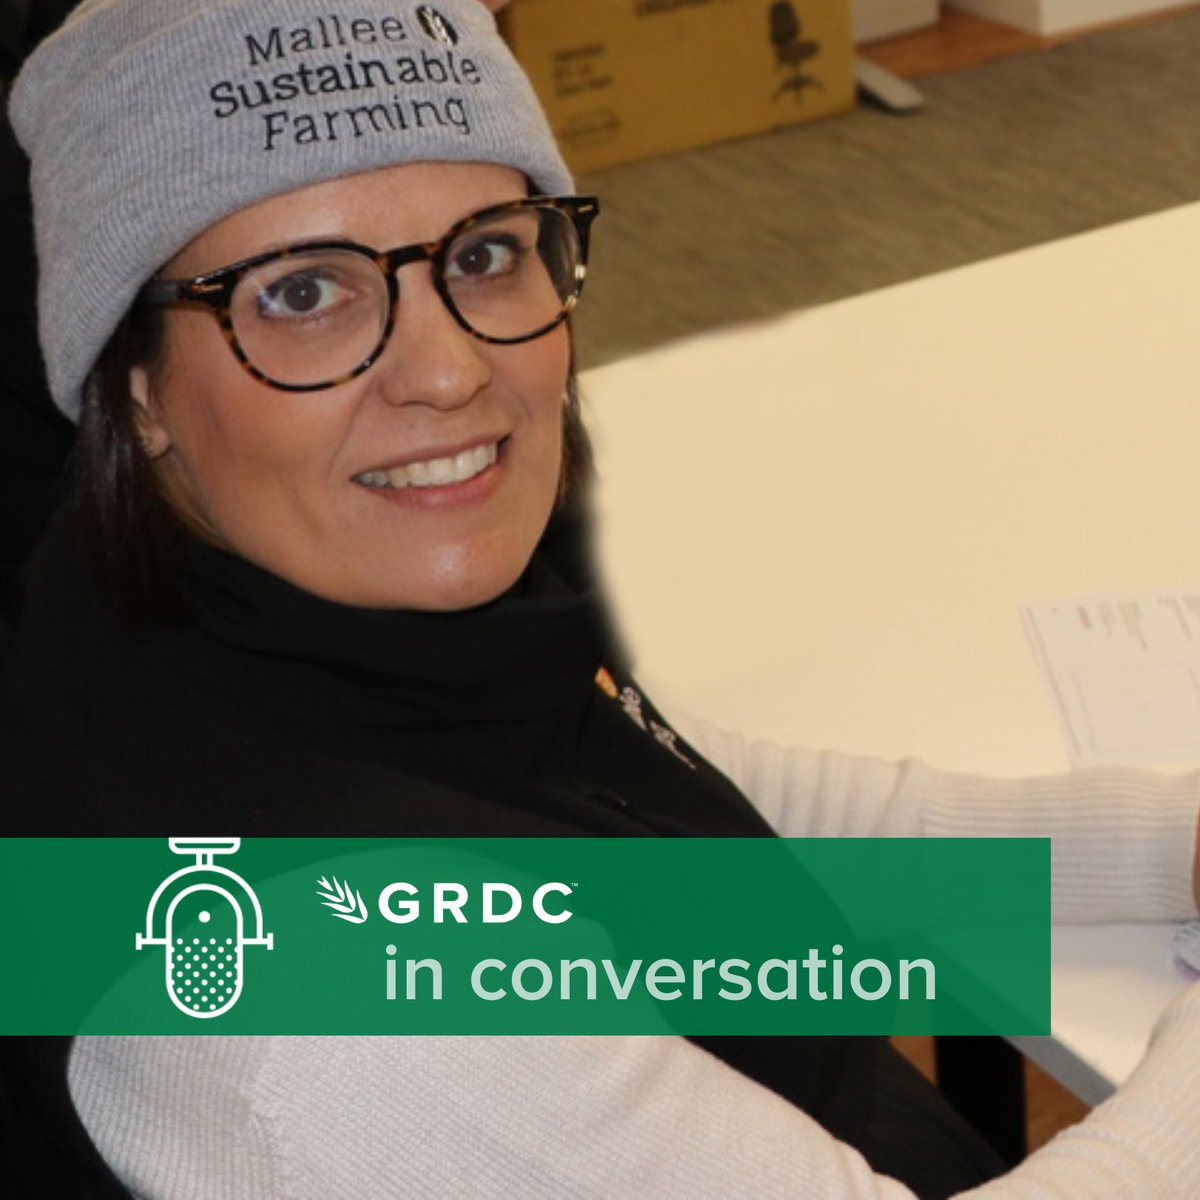 🎙️ NEW PODCAST 'GRDC in Conversation' is with Tanja Morgan @TanjaMorgan @MsfMallee An SA Mallee farmer, communicator & dog trainer, you'll get some energy from her optimistic outlook, approach to challenges & story. With @Olilelievre ▶️ bit.ly/3PsFJ6O 🎧